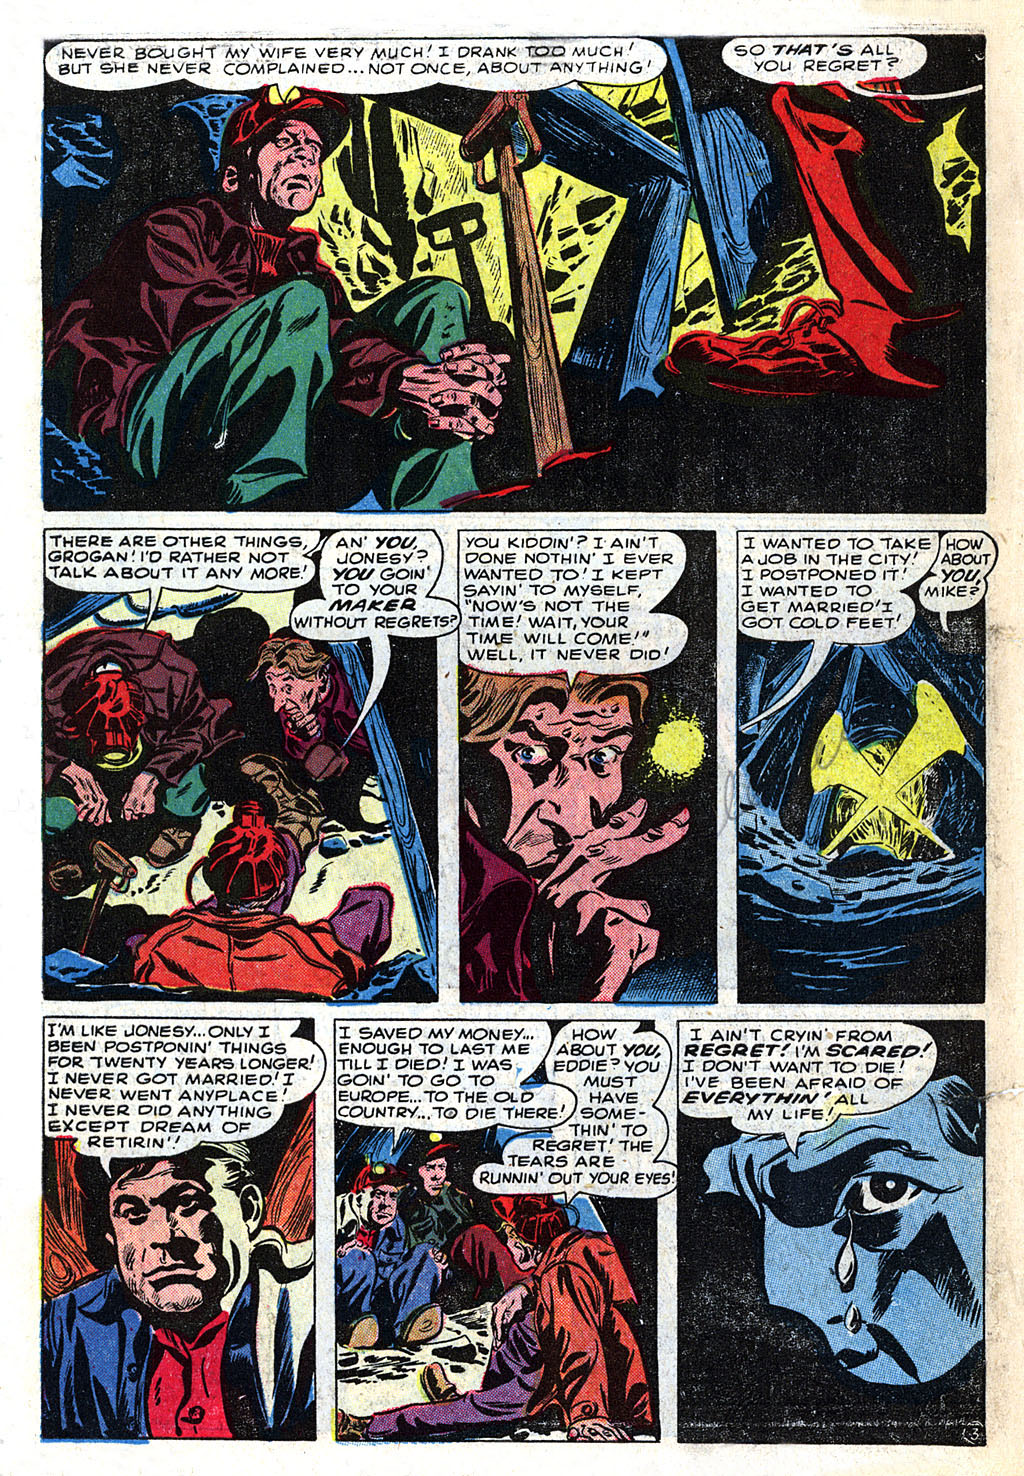 Marvel Tales (1949) 131 Page 29